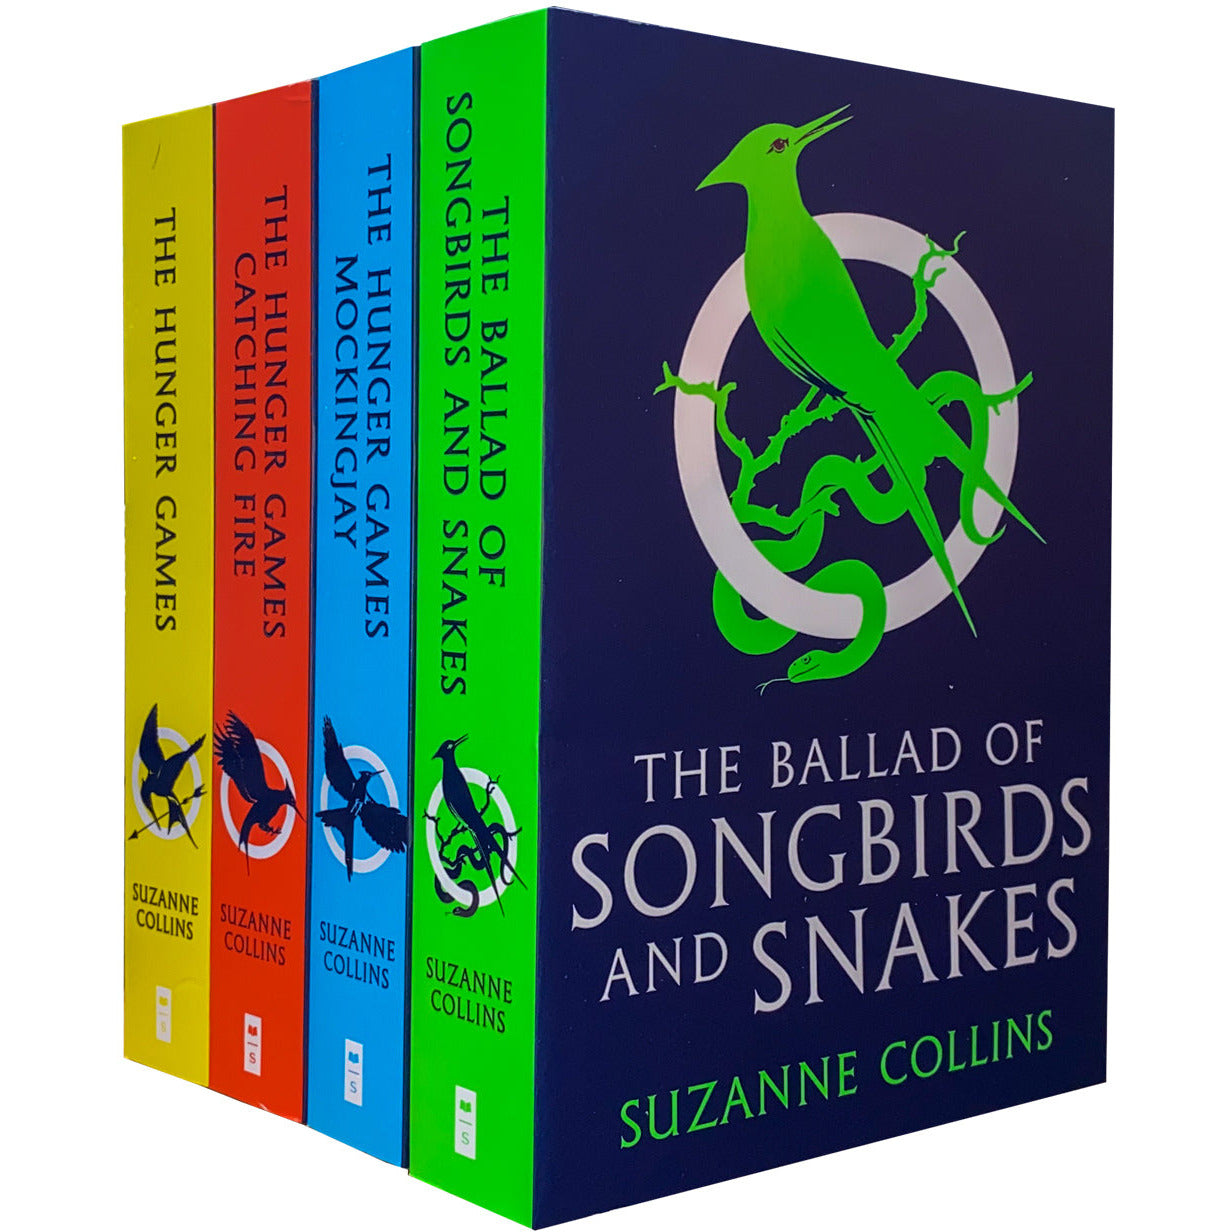 Hunger Games Trilogy Series 4 Books Collection Set By Suzanne Collins PB NEW